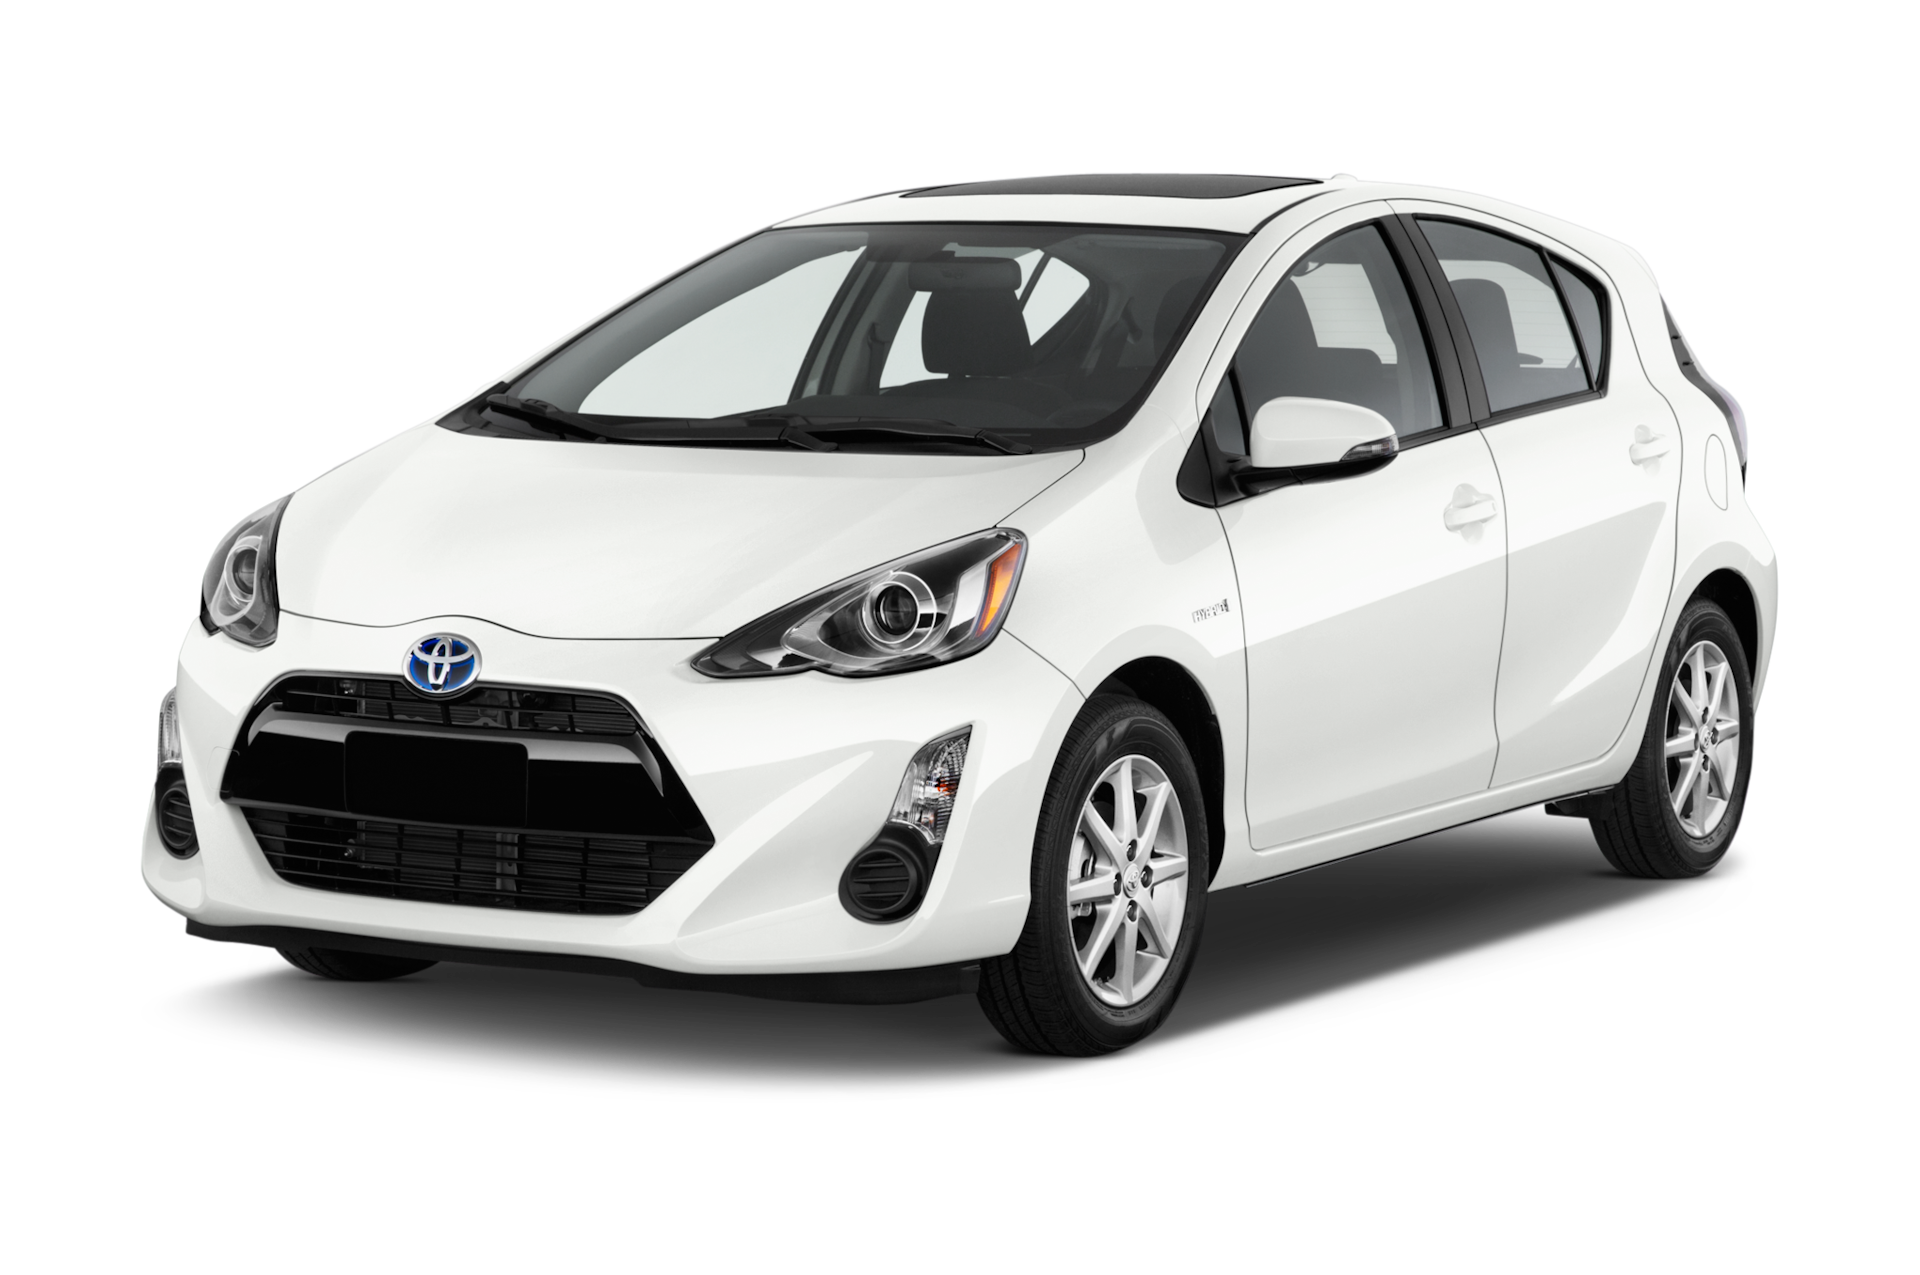 2016 Toyota Prius c Prices, Reviews, and Photos - MotorTrend